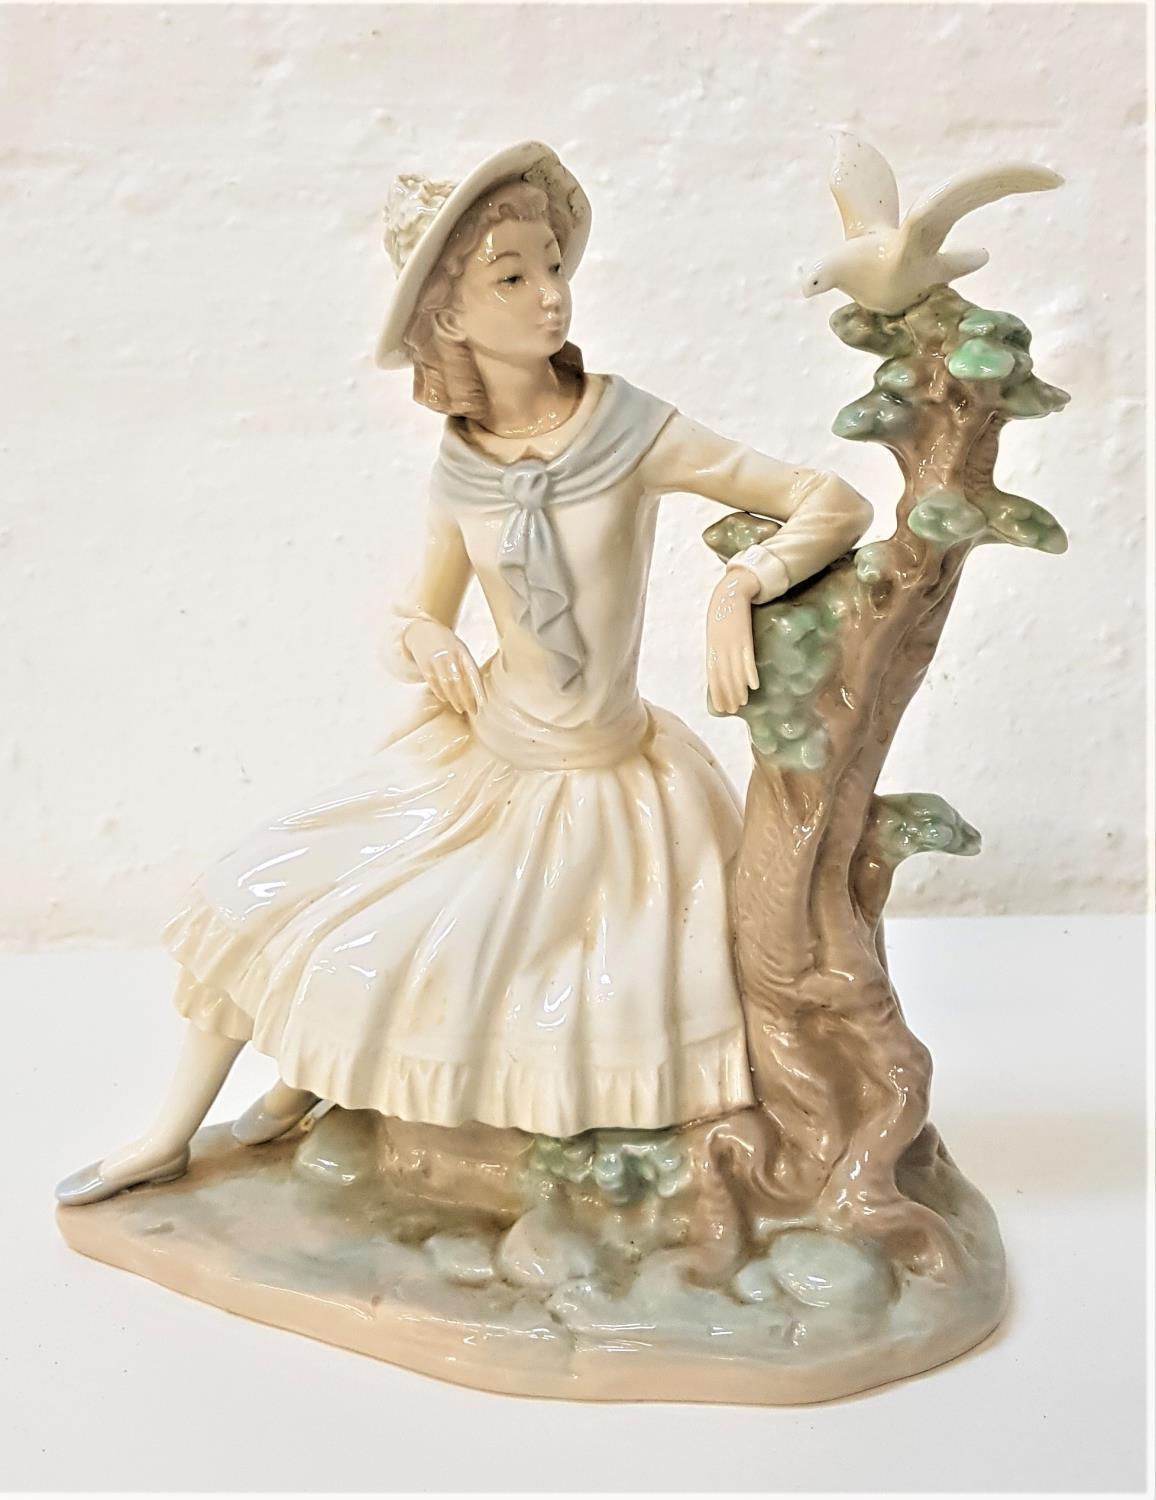 NAO PORCELAIN FIGURINE of a young girl seated by a tree looking at a dove, 24cm high